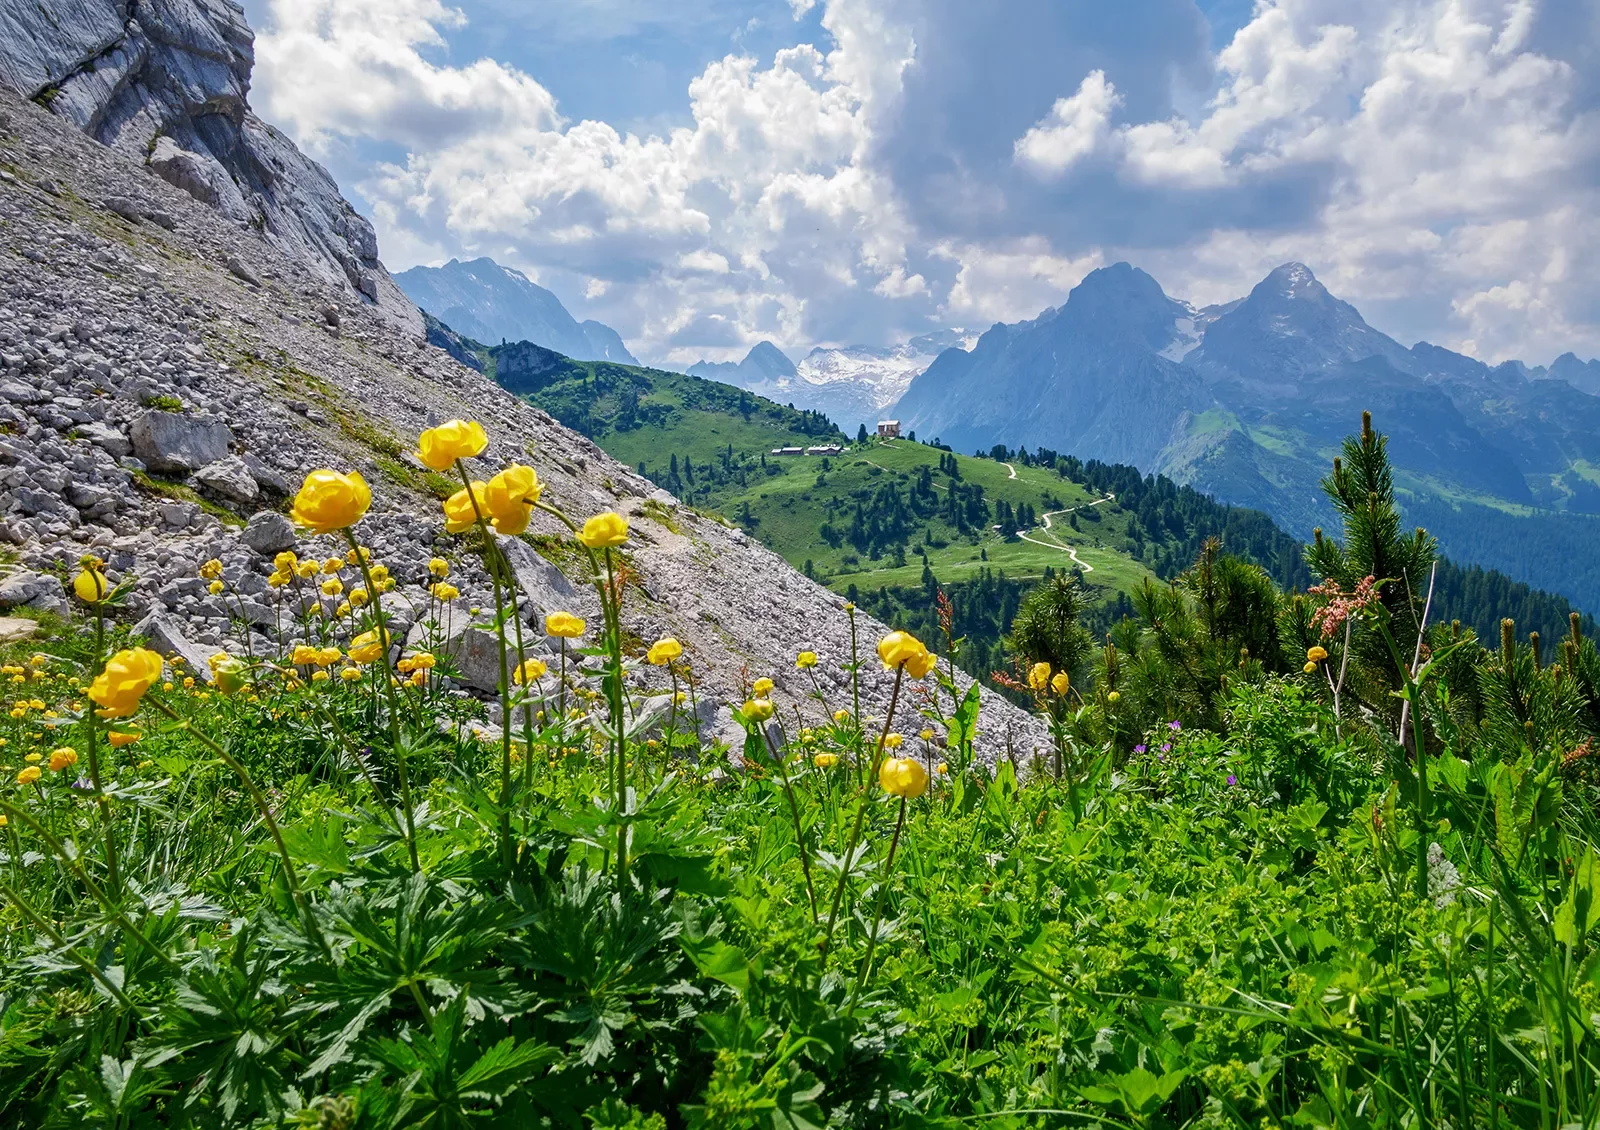 Yellow flowers surrounded by weeds along a rocky hillside